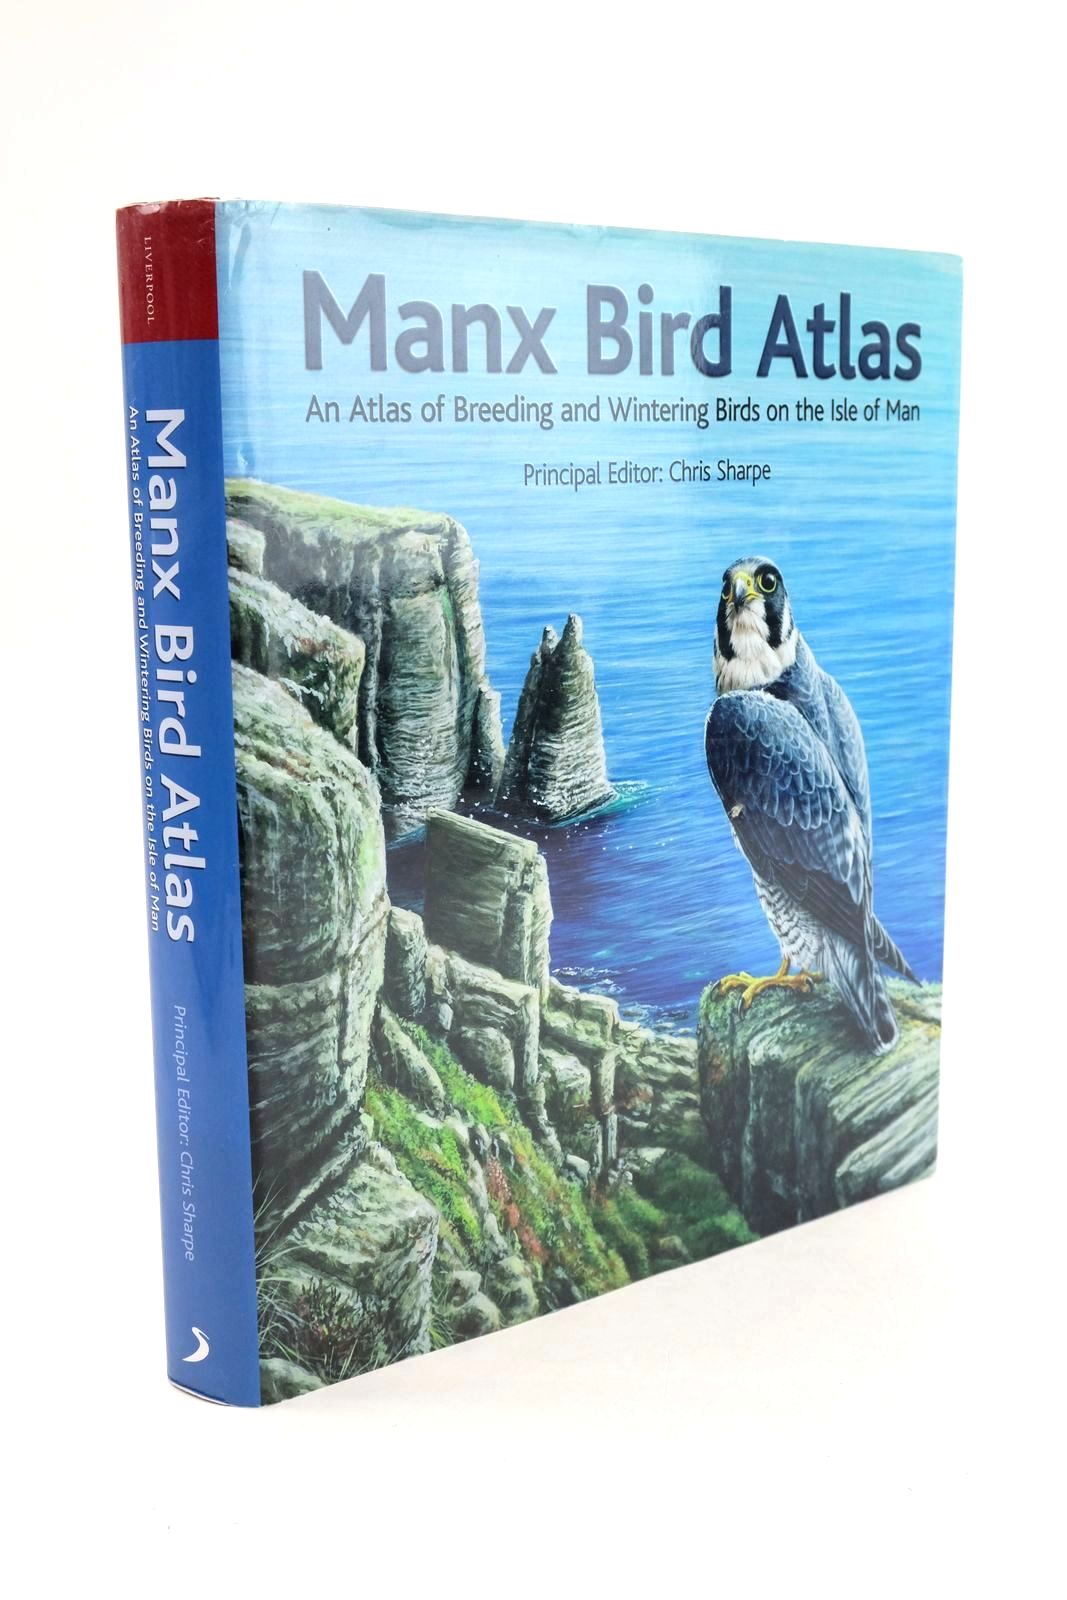 Photo of MANX BIRD ATLAS written by Sharpe, Christopher Martyn
Bishop, Jason Paul
Cullen, James Patrick
Giovannini, Peter George
Thorpe, John Peter
Weaver, Peter published by Liverpool University Press (STOCK CODE: 1324096)  for sale by Stella & Rose's Books